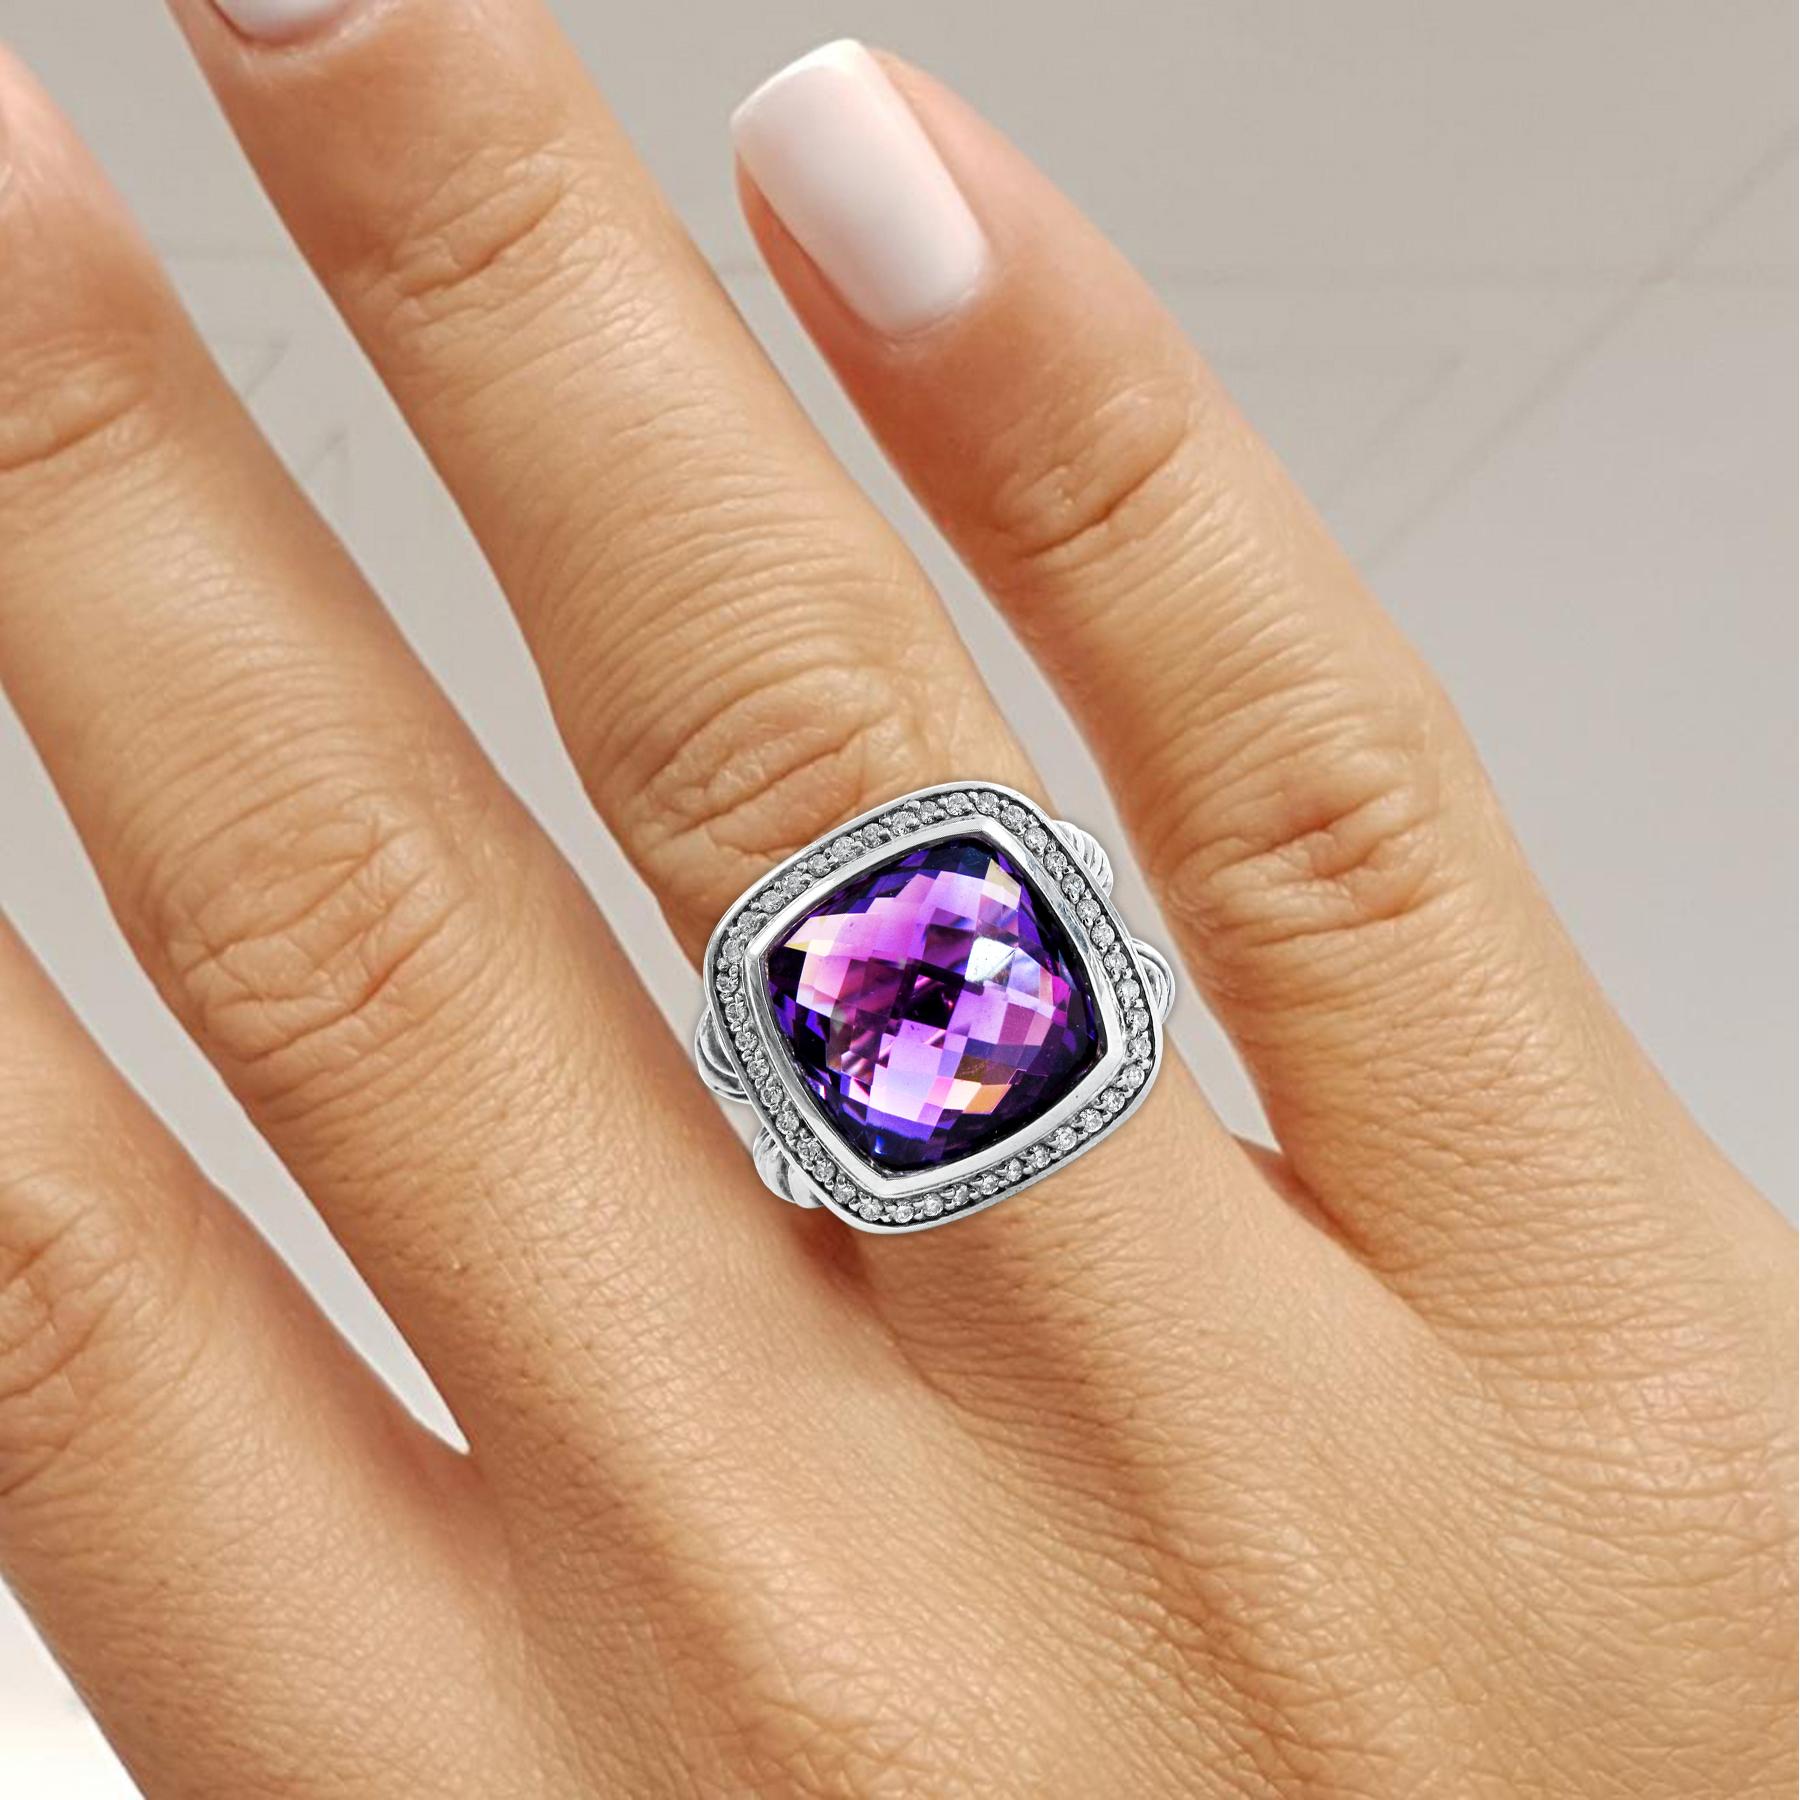 This classic and modern David Yurman ring features a princess-cut 14mm by 14mm  faceted amethyst and 0.3-carat pave diamonds that accents around it. It is further accented by a sterling silver shank design. It weighs 15.6 grams, 18.5 mm wide and the